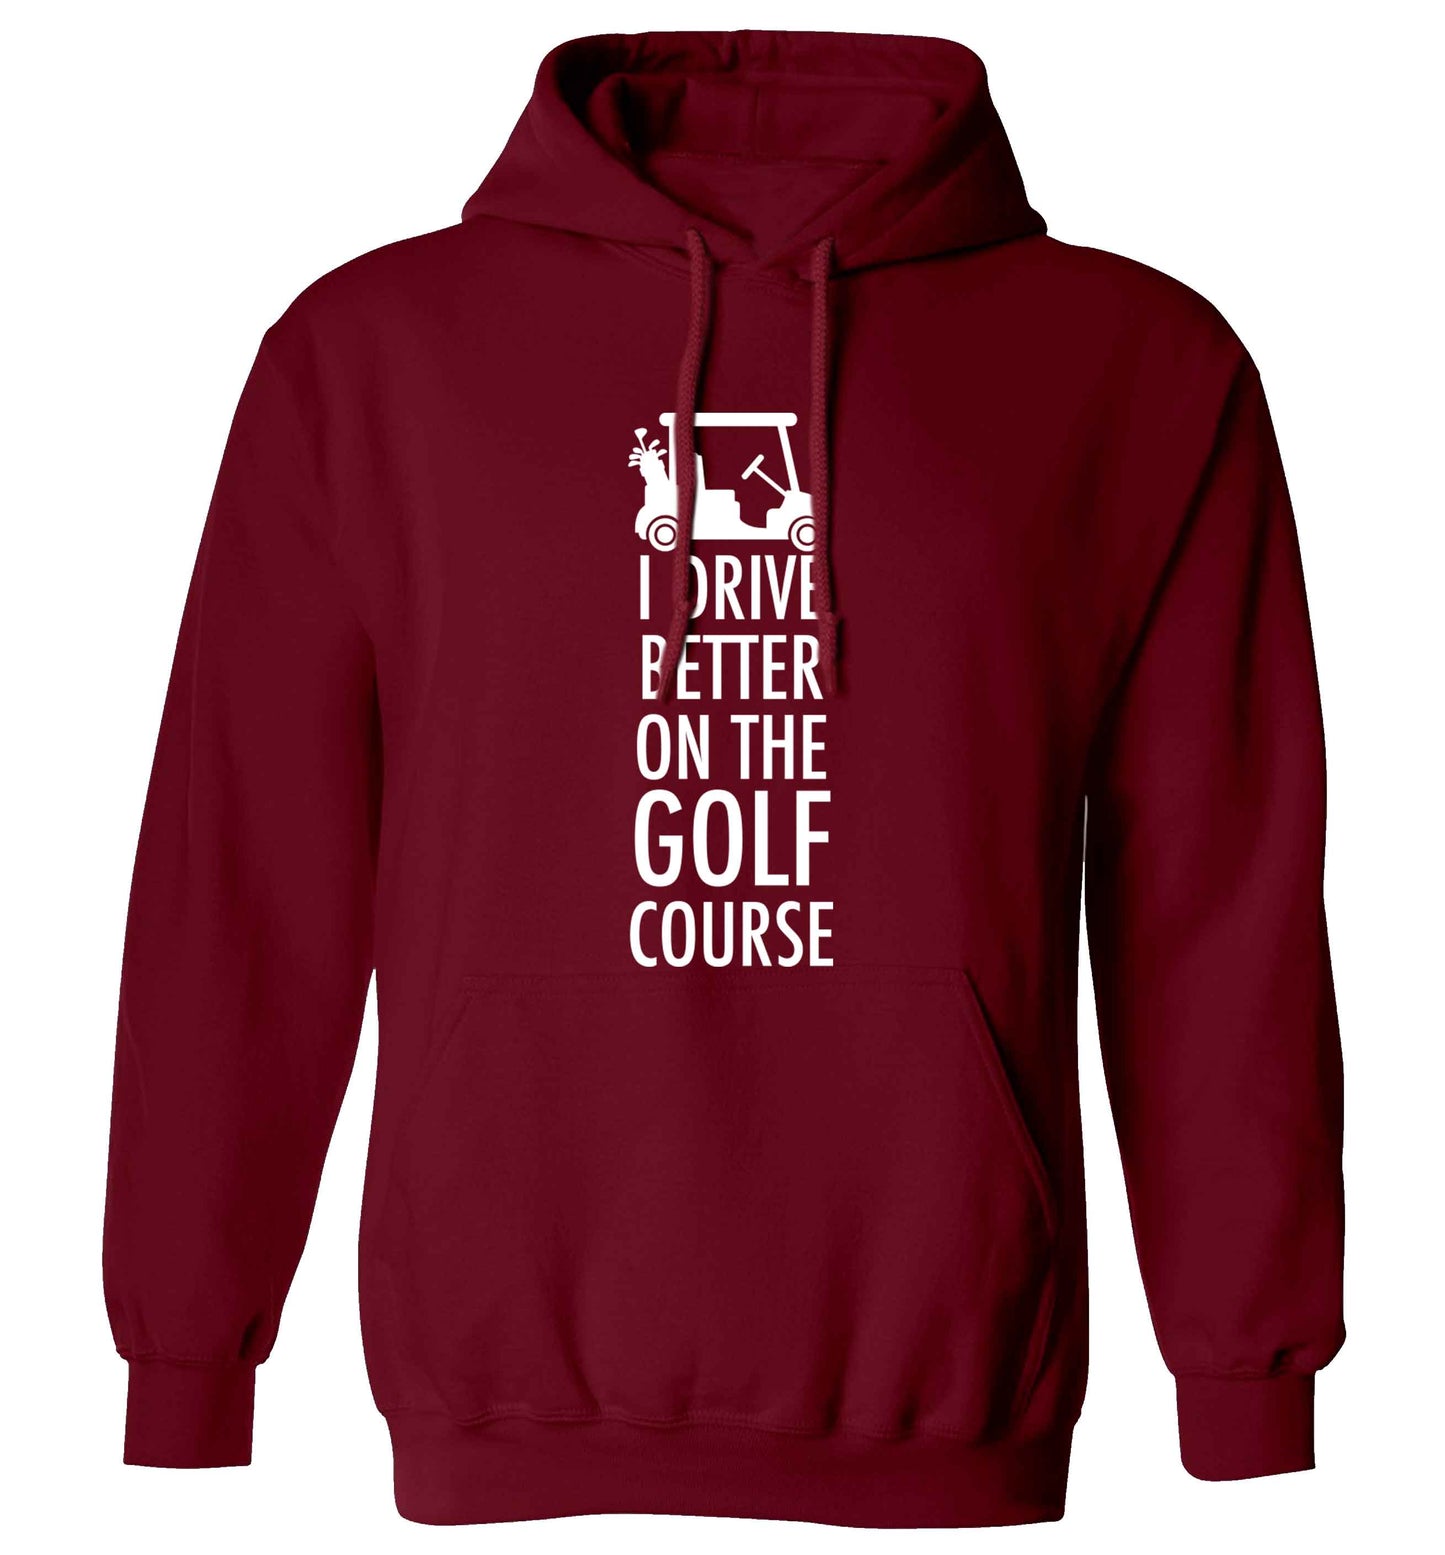 I drive better on the golf course adults unisex maroon hoodie 2XL